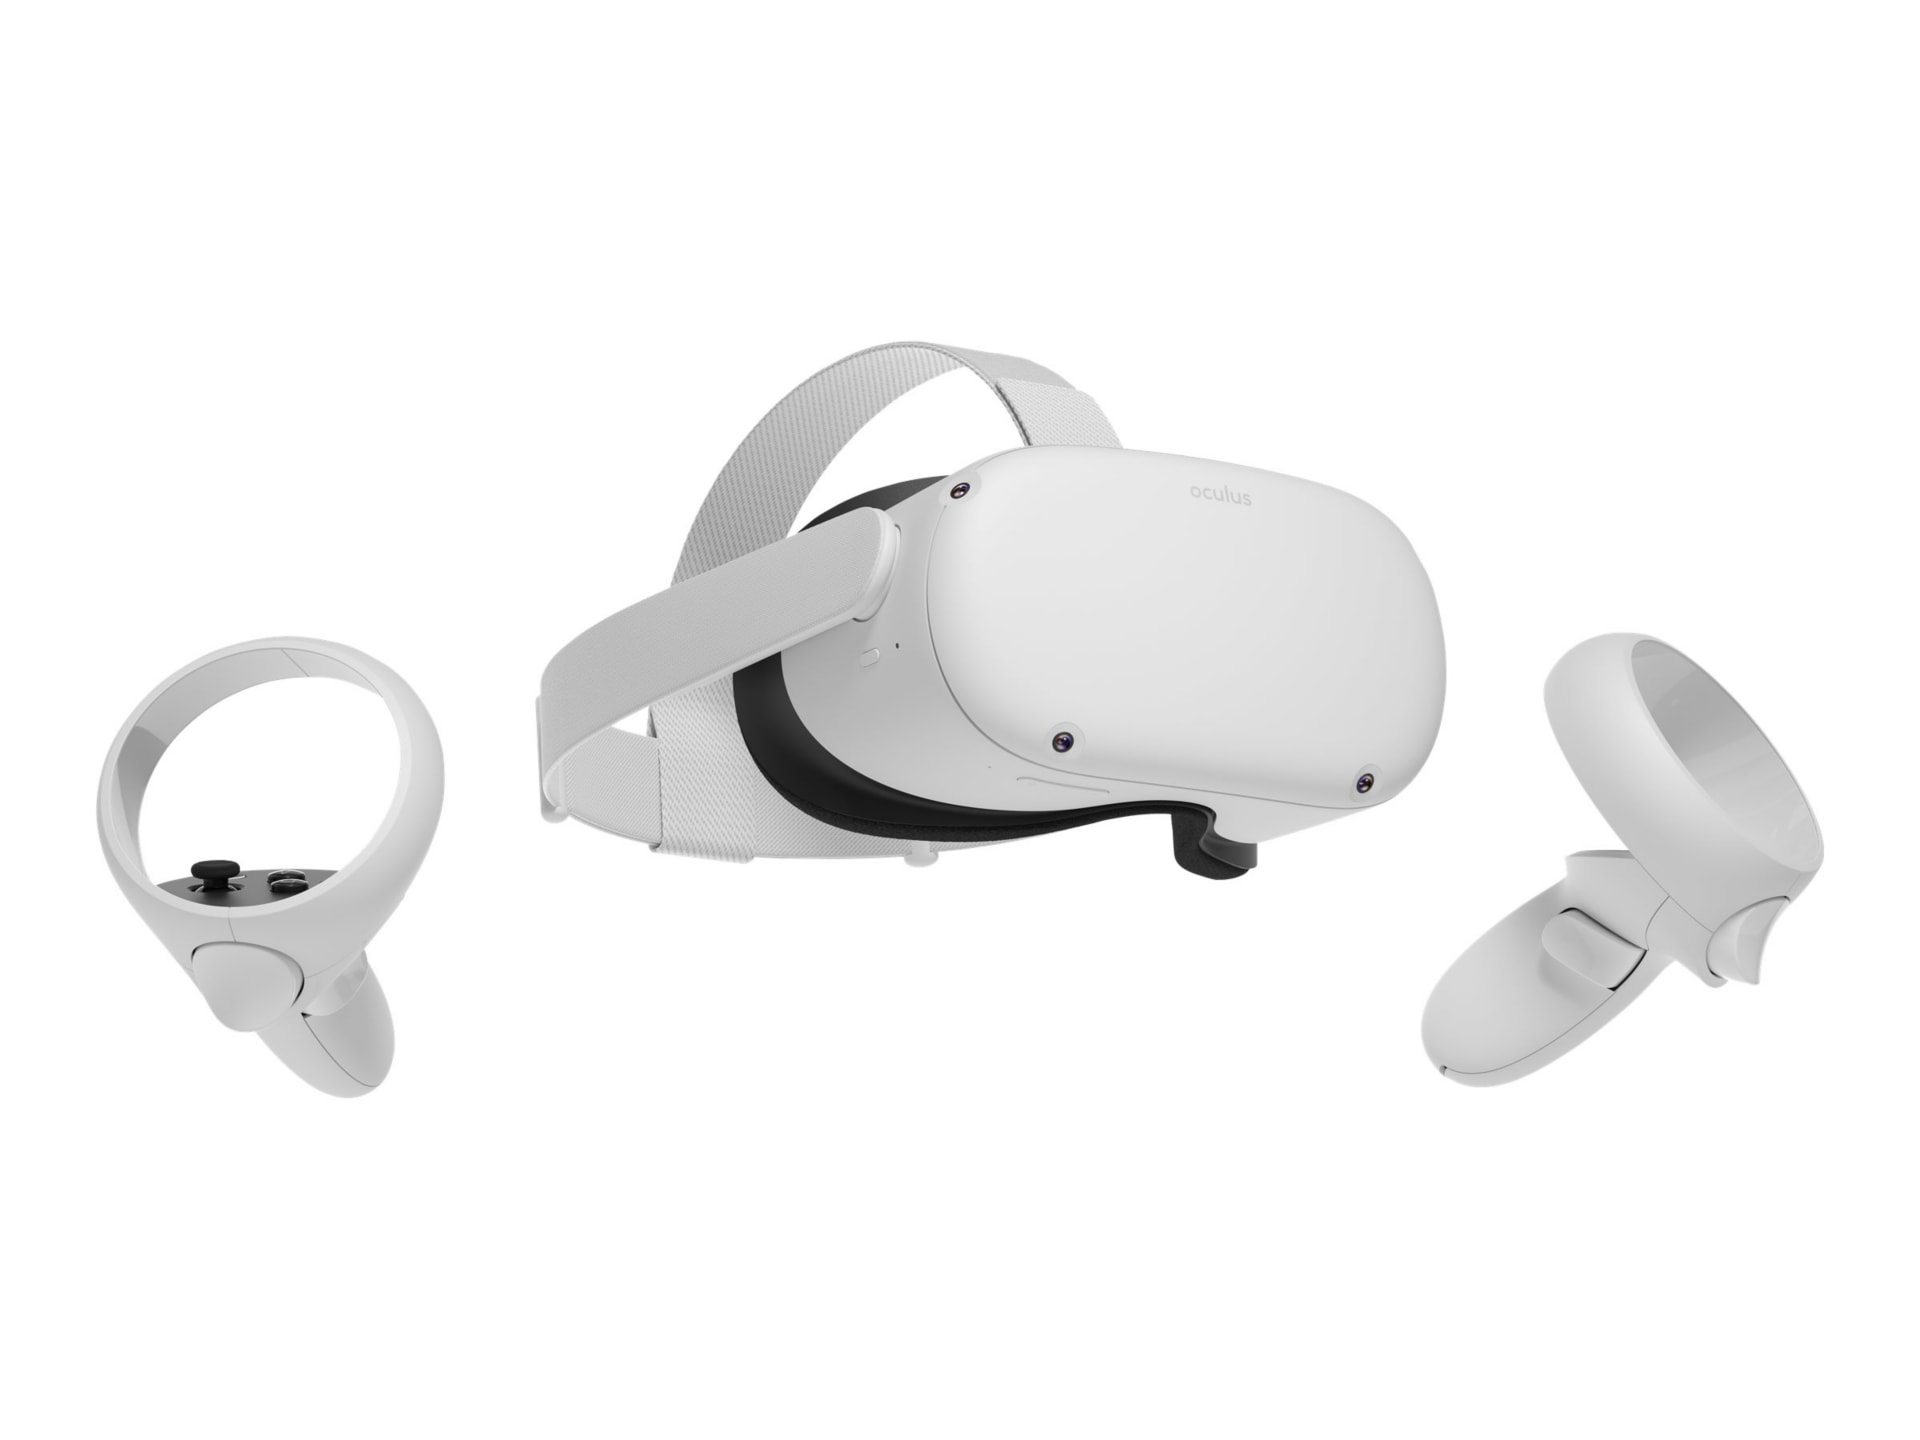 Meta Quest 2 - virtual reality system - 899-00188-02 - VR Headsets